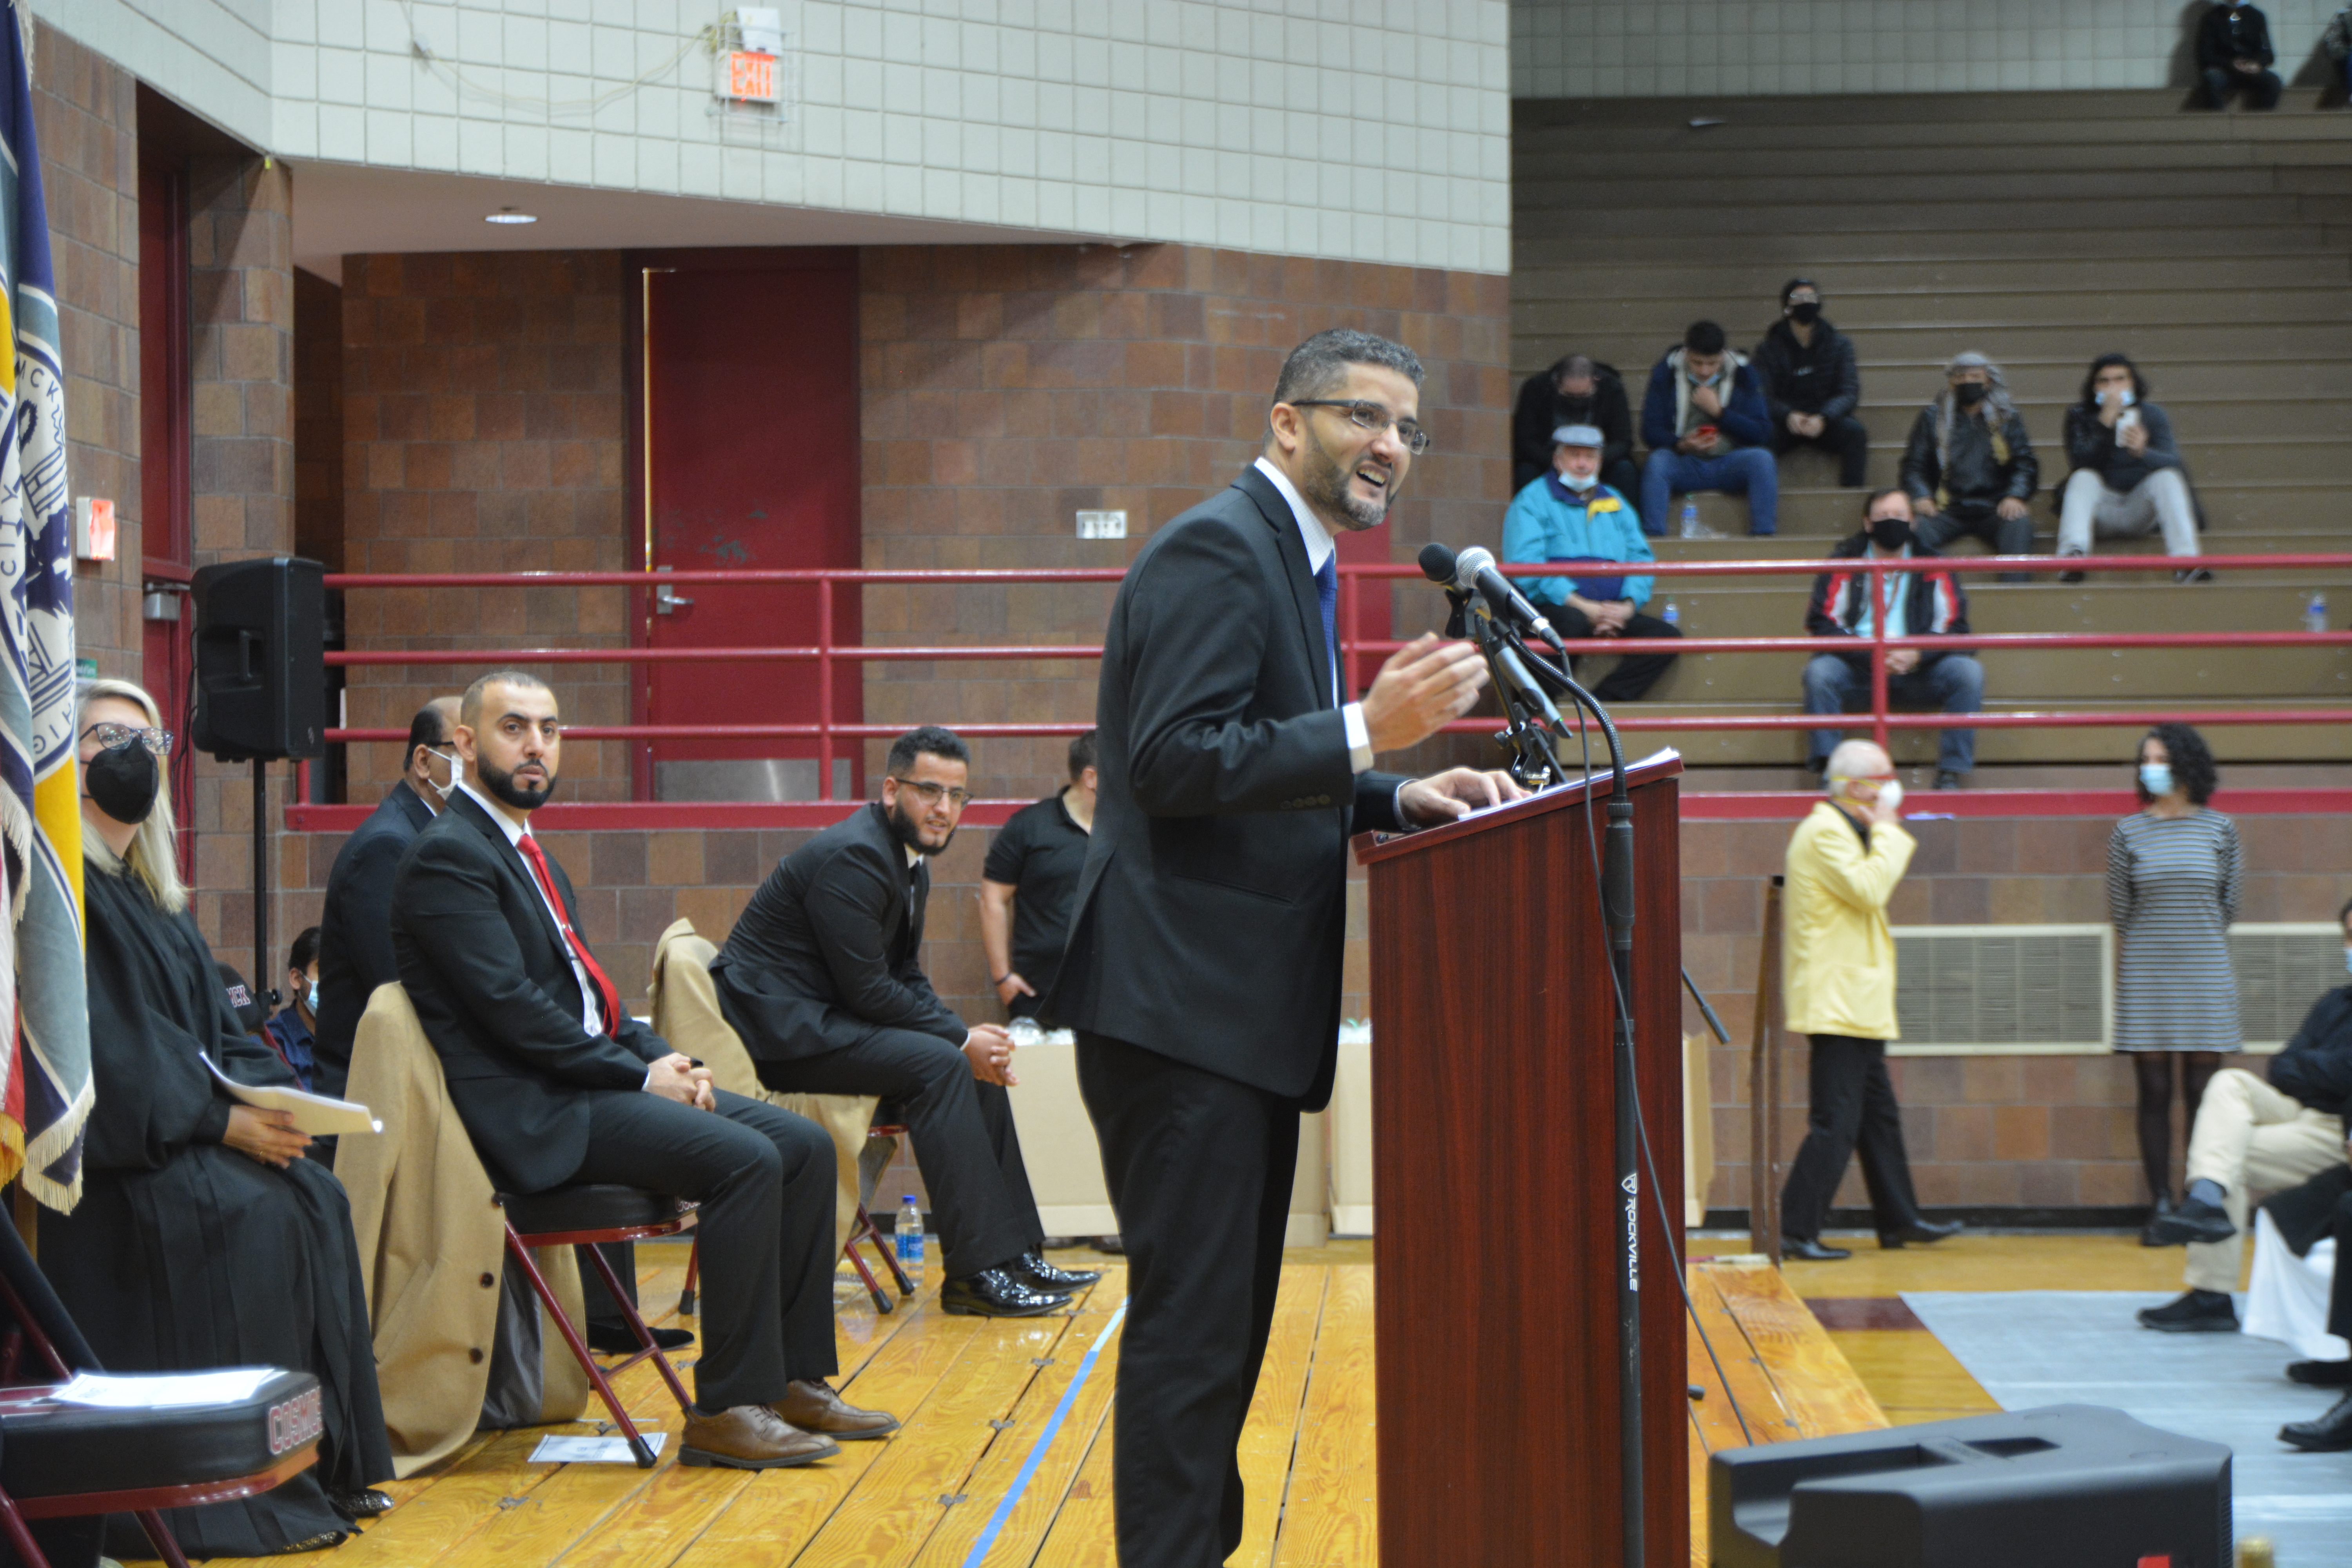 Hamtramck Mayor Amer Ghalib speaks at his inauguration in January. Photo courtesy: The Hamtramck Review